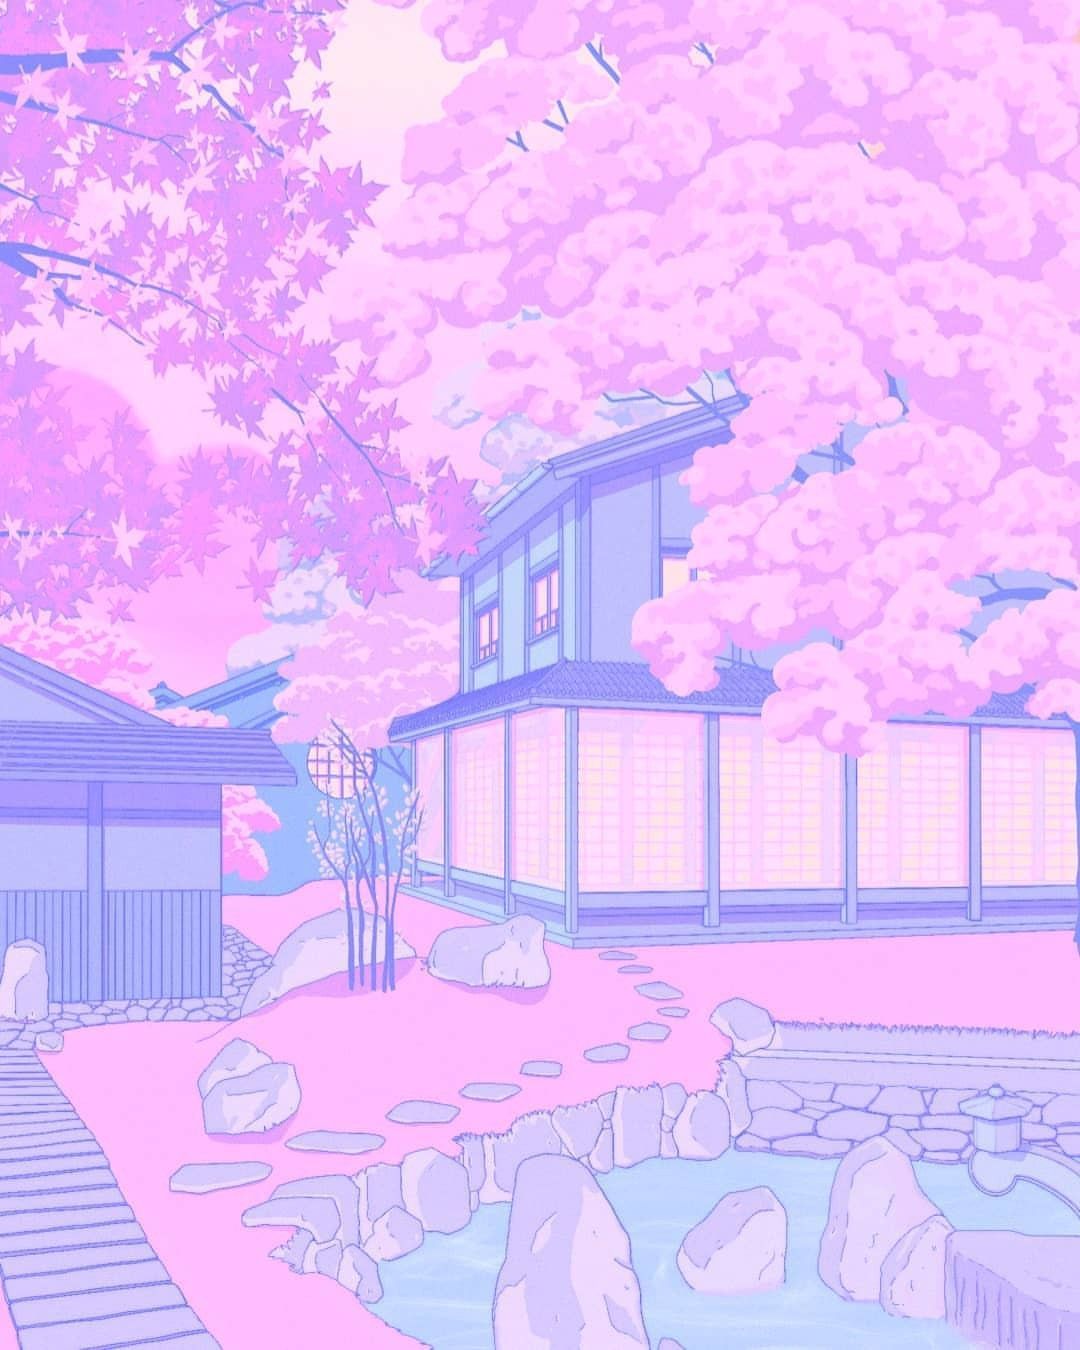 A pink and purple house with trees in the background - Pastel, Japanese, kawaii, Japan